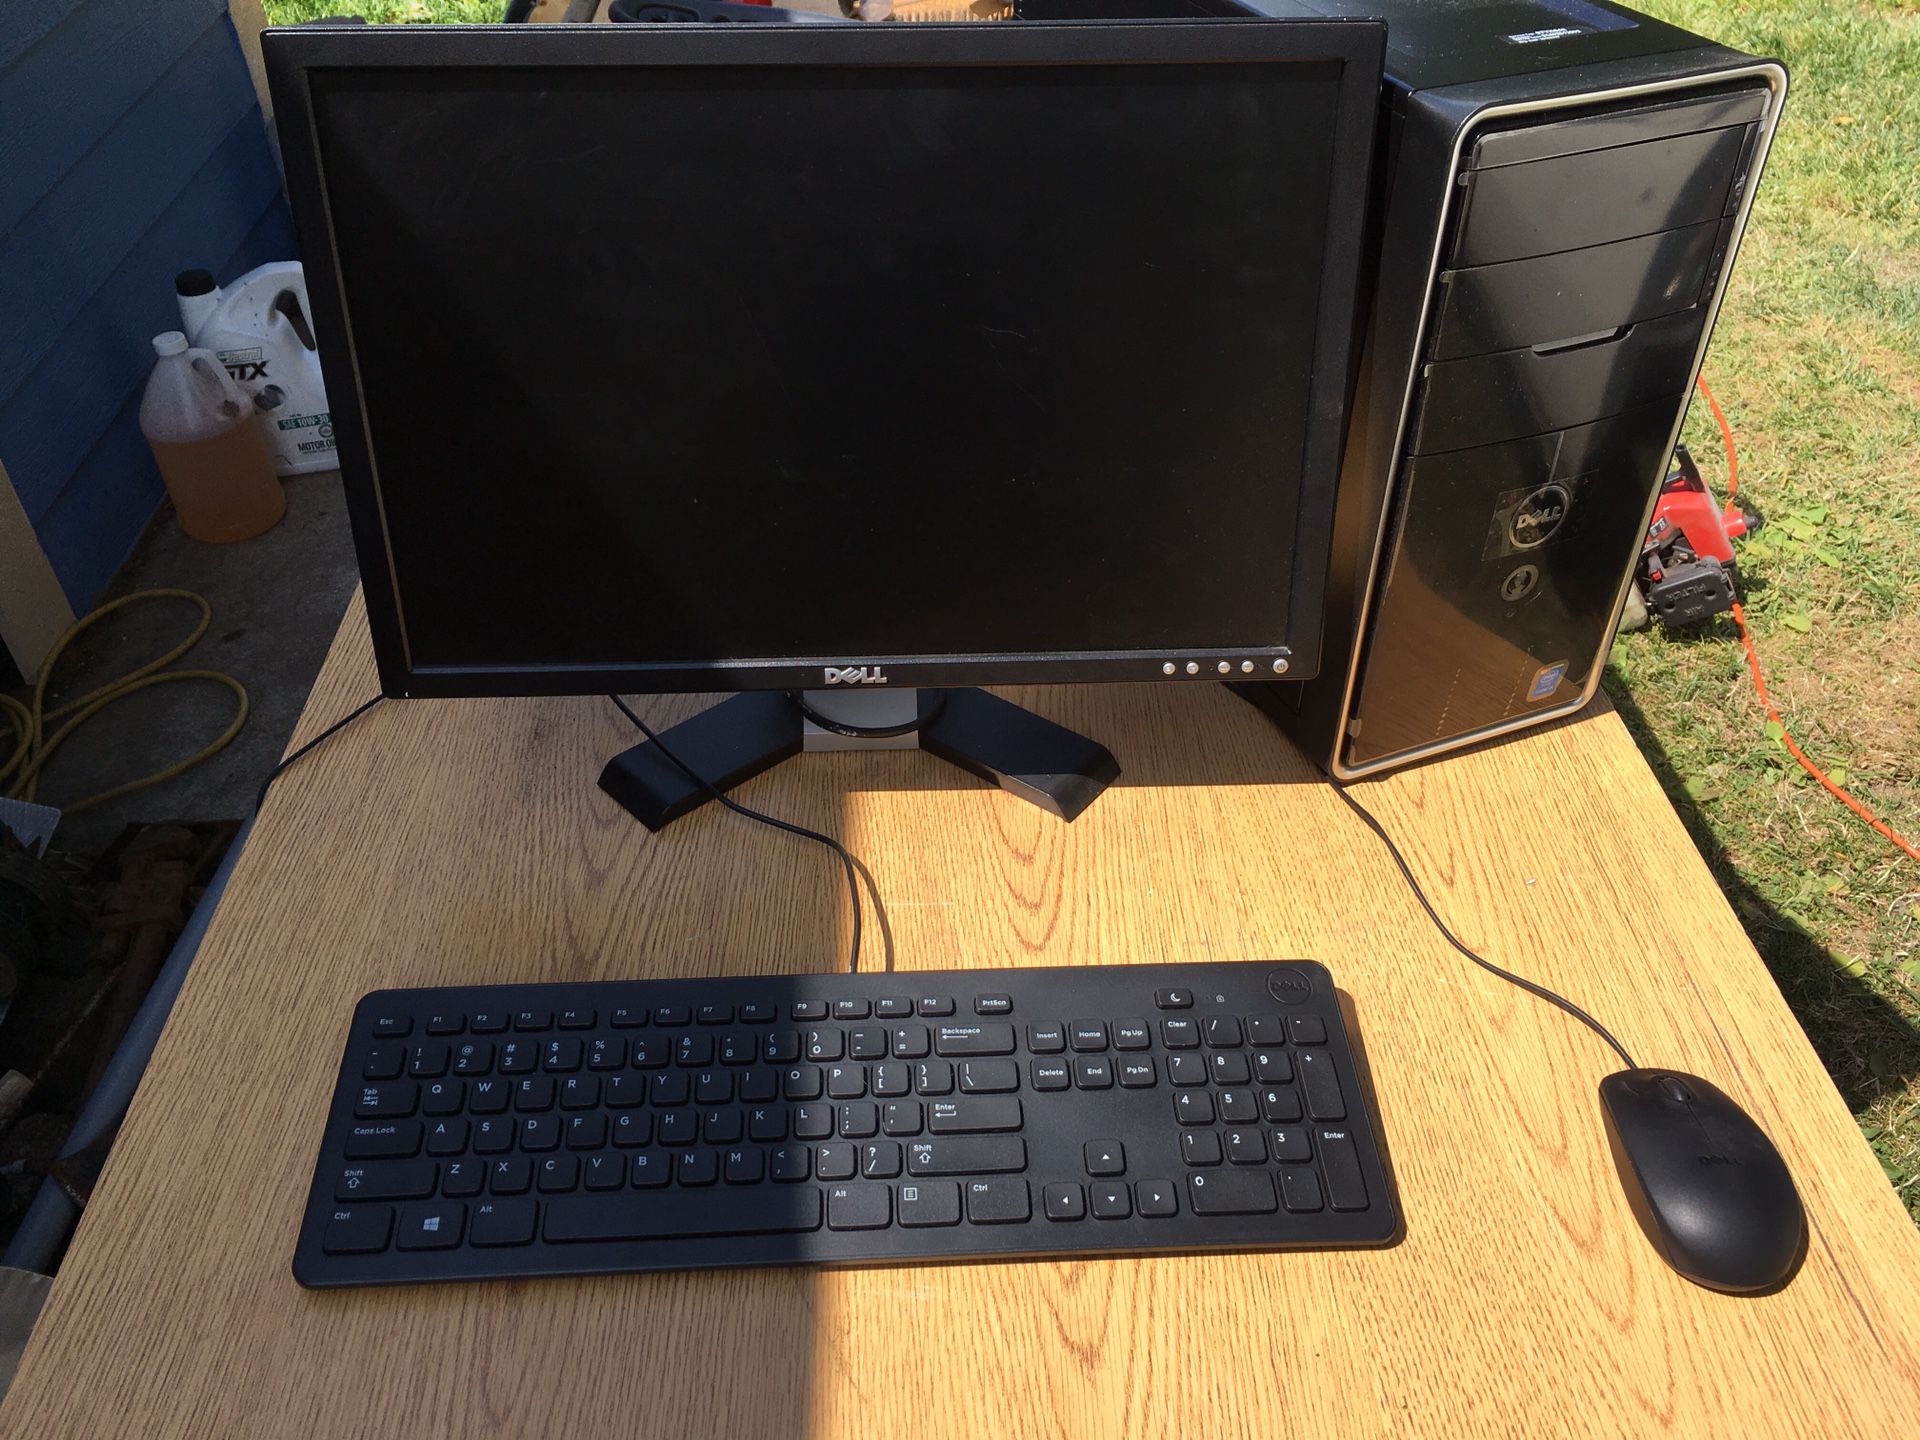 Dell Inspiron 3847 I-5 8gb ram 1TB HDD with Monitor, keyboard and mouse